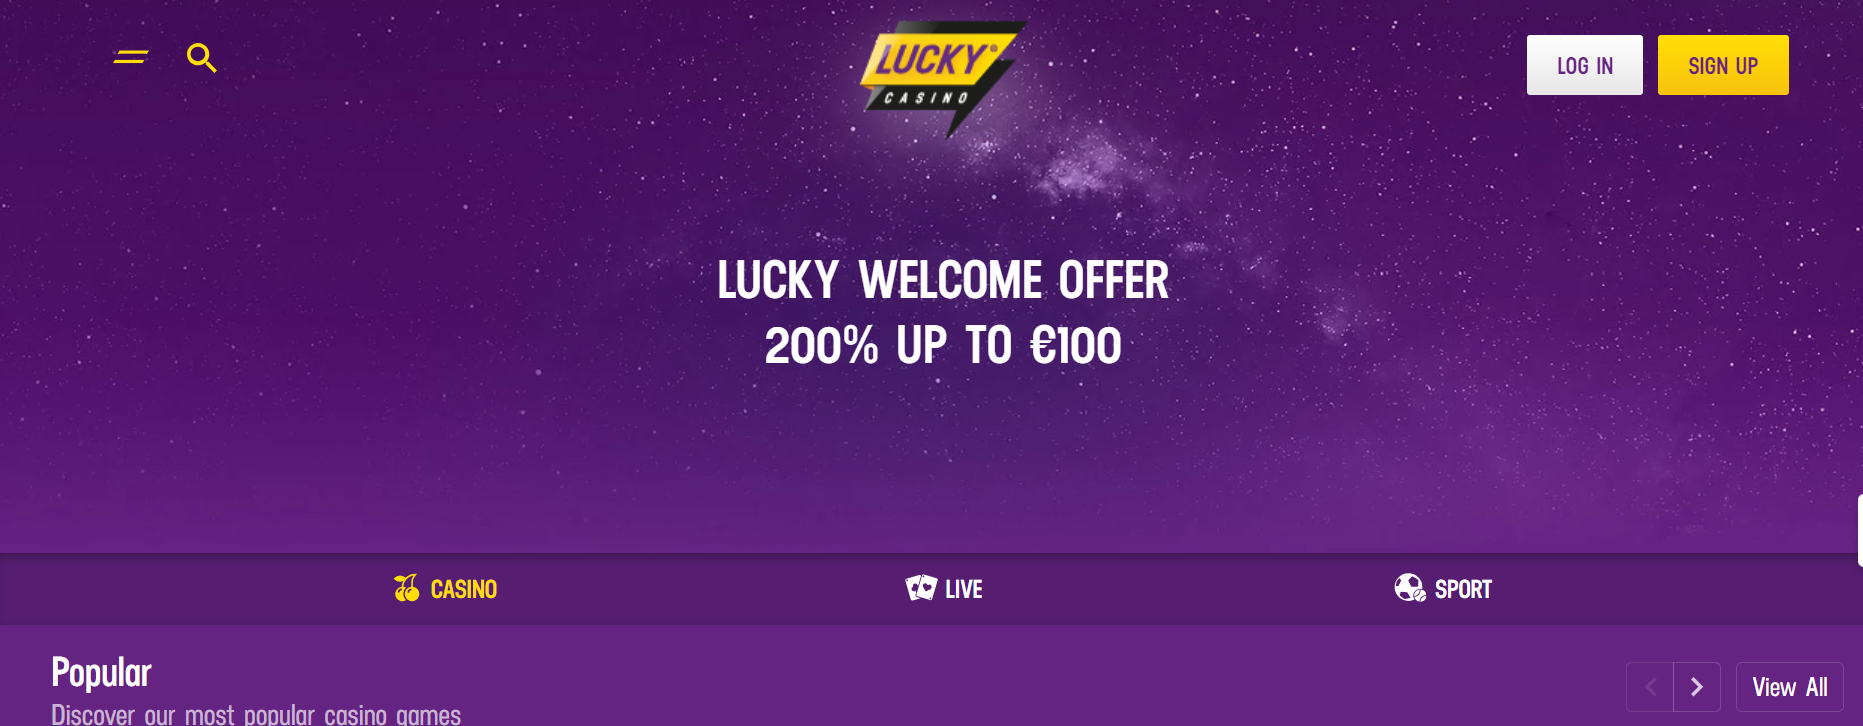 Lucky Casino Welcome Offer